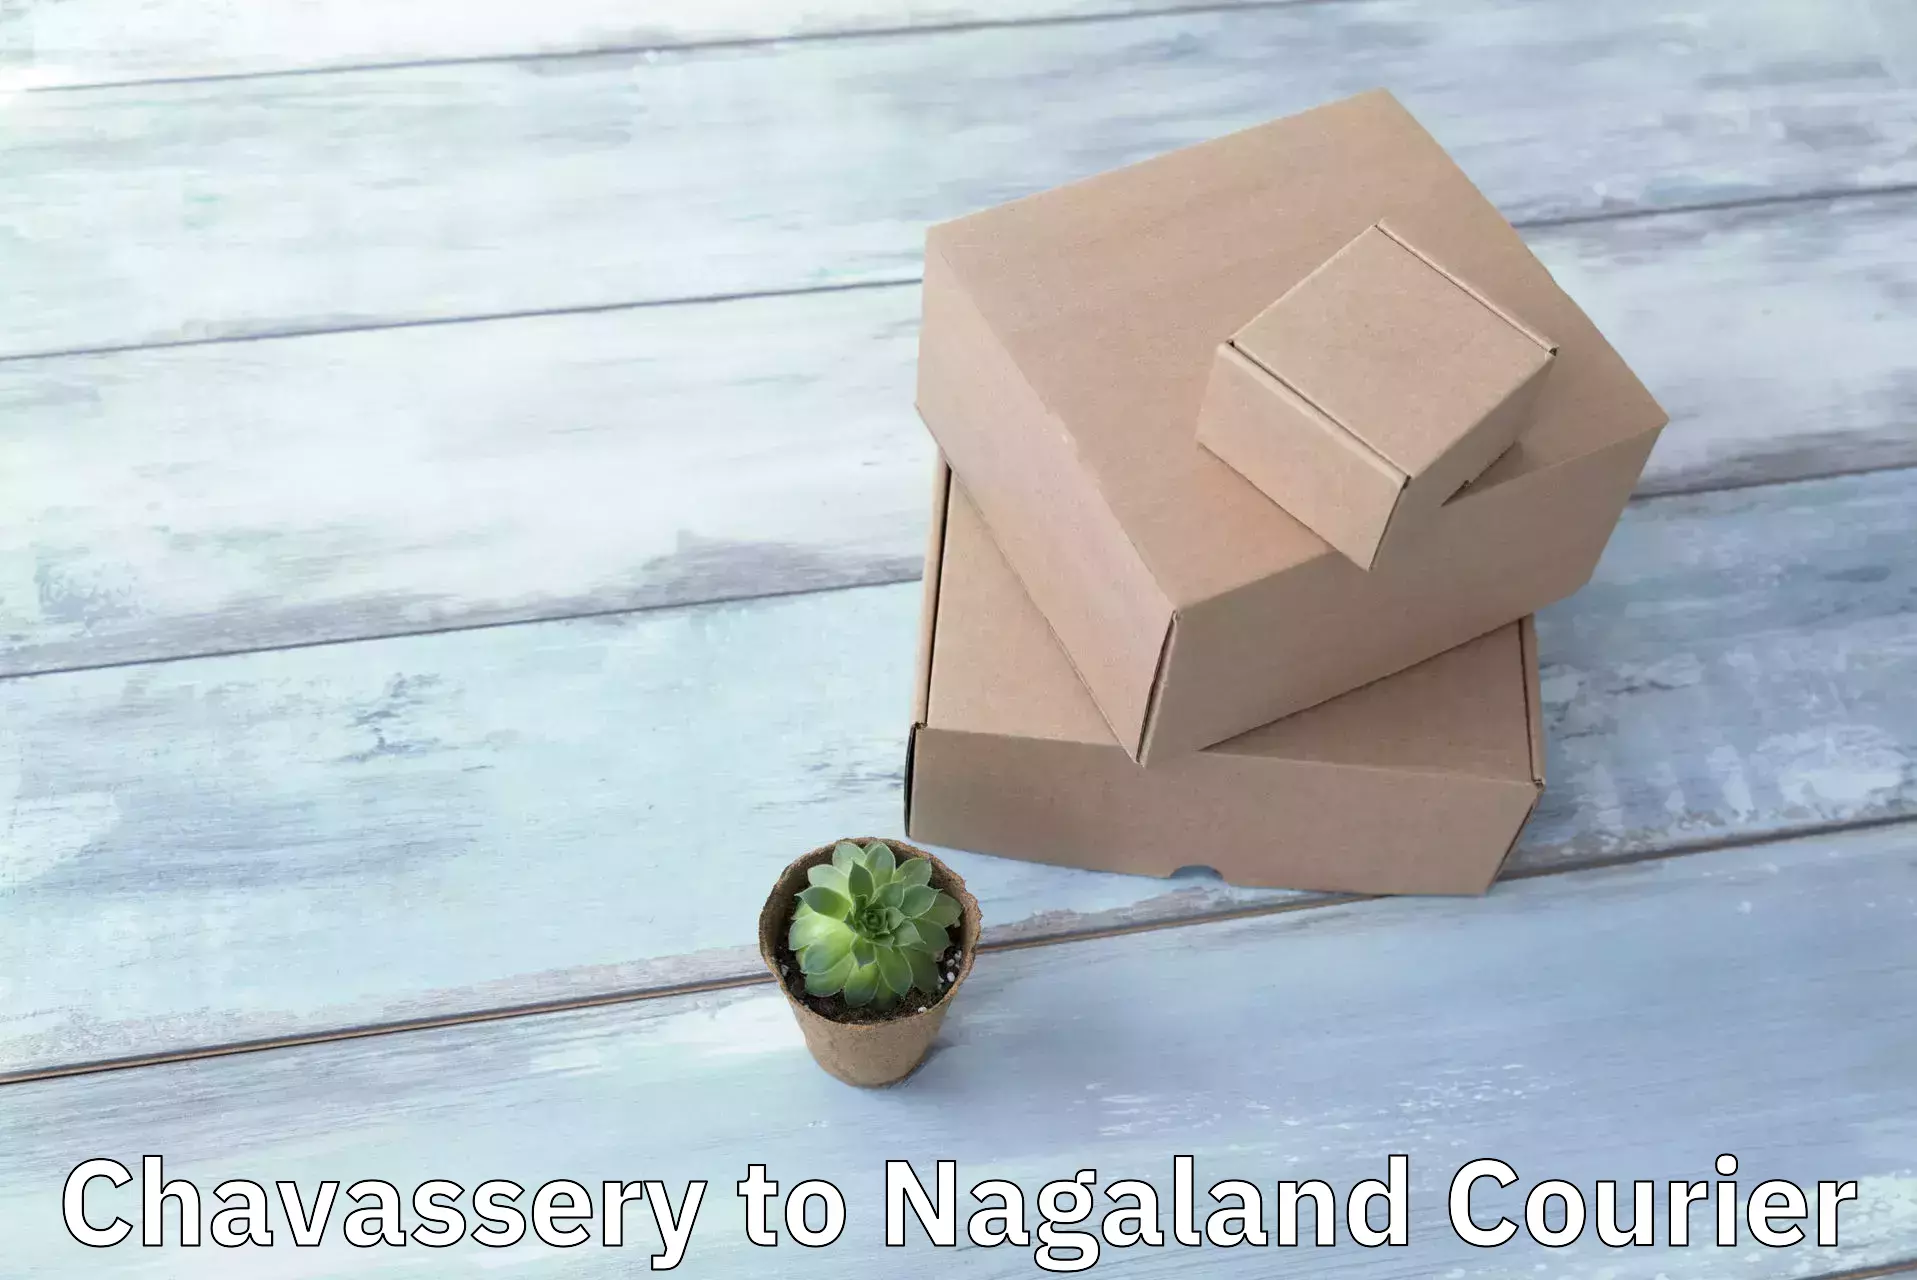 State-of-the-art courier technology Chavassery to Nagaland